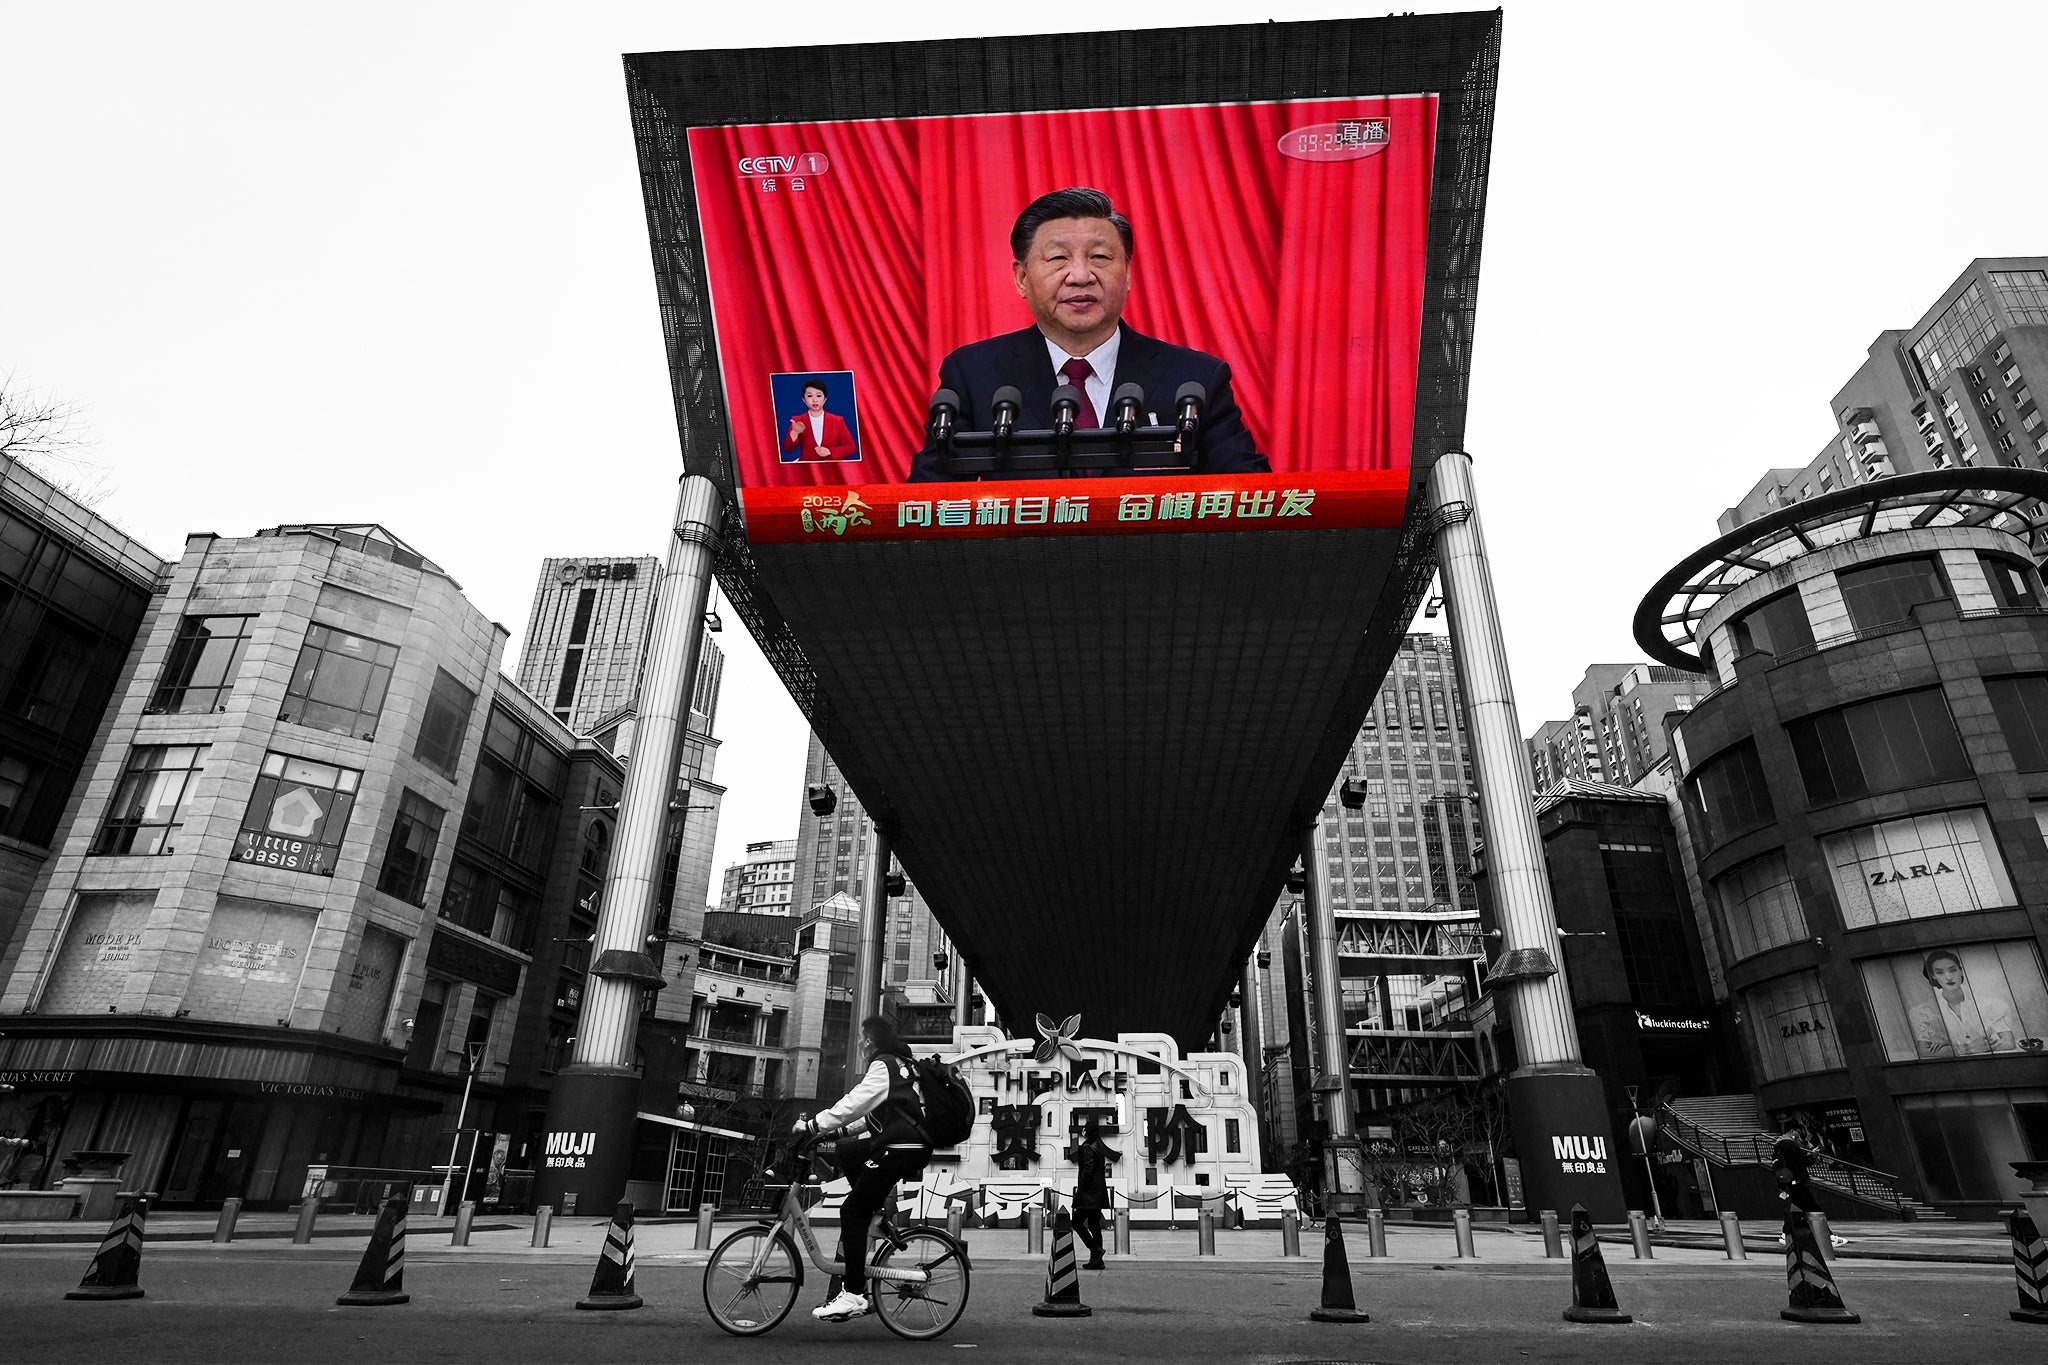 Chinese people under President Xi Jinping are so business-minded that it’s almost impossible to believe they live in a state that is still officially communist